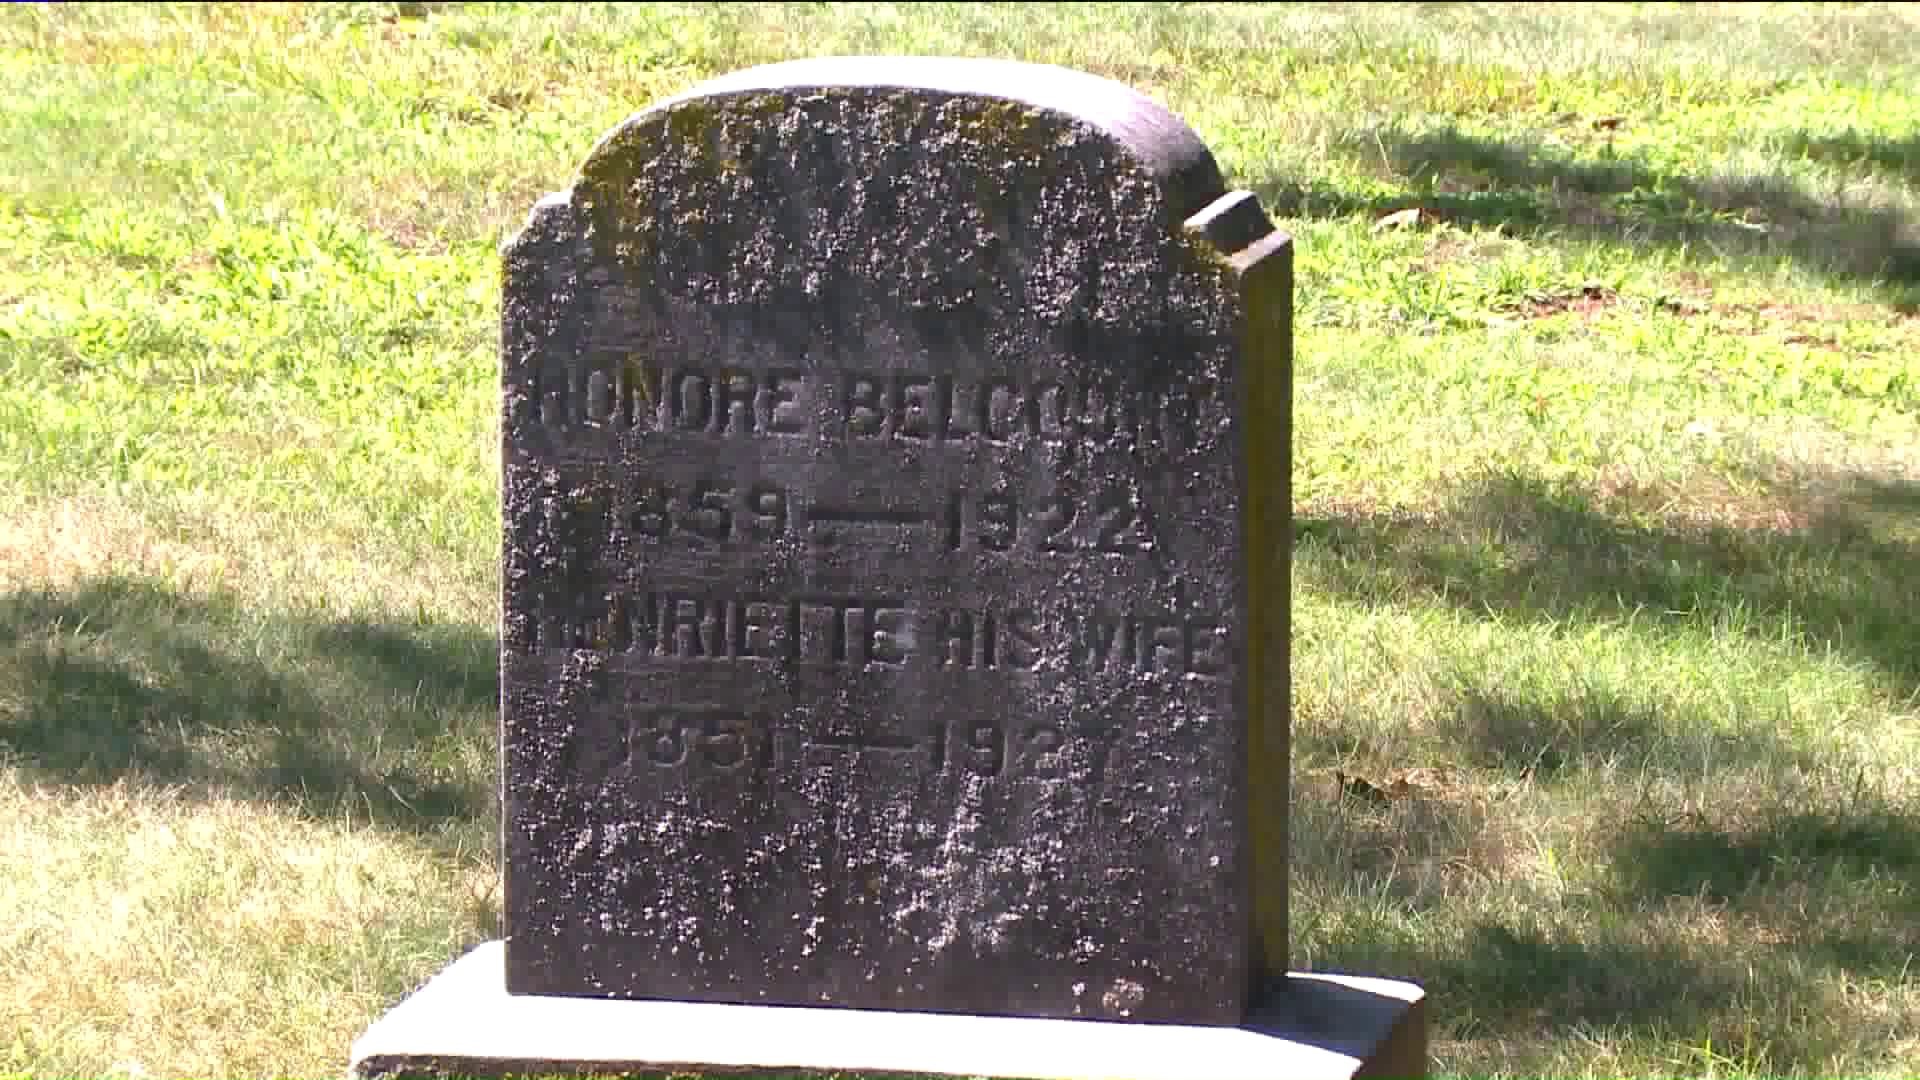 One man steps up to fix damages tombstones